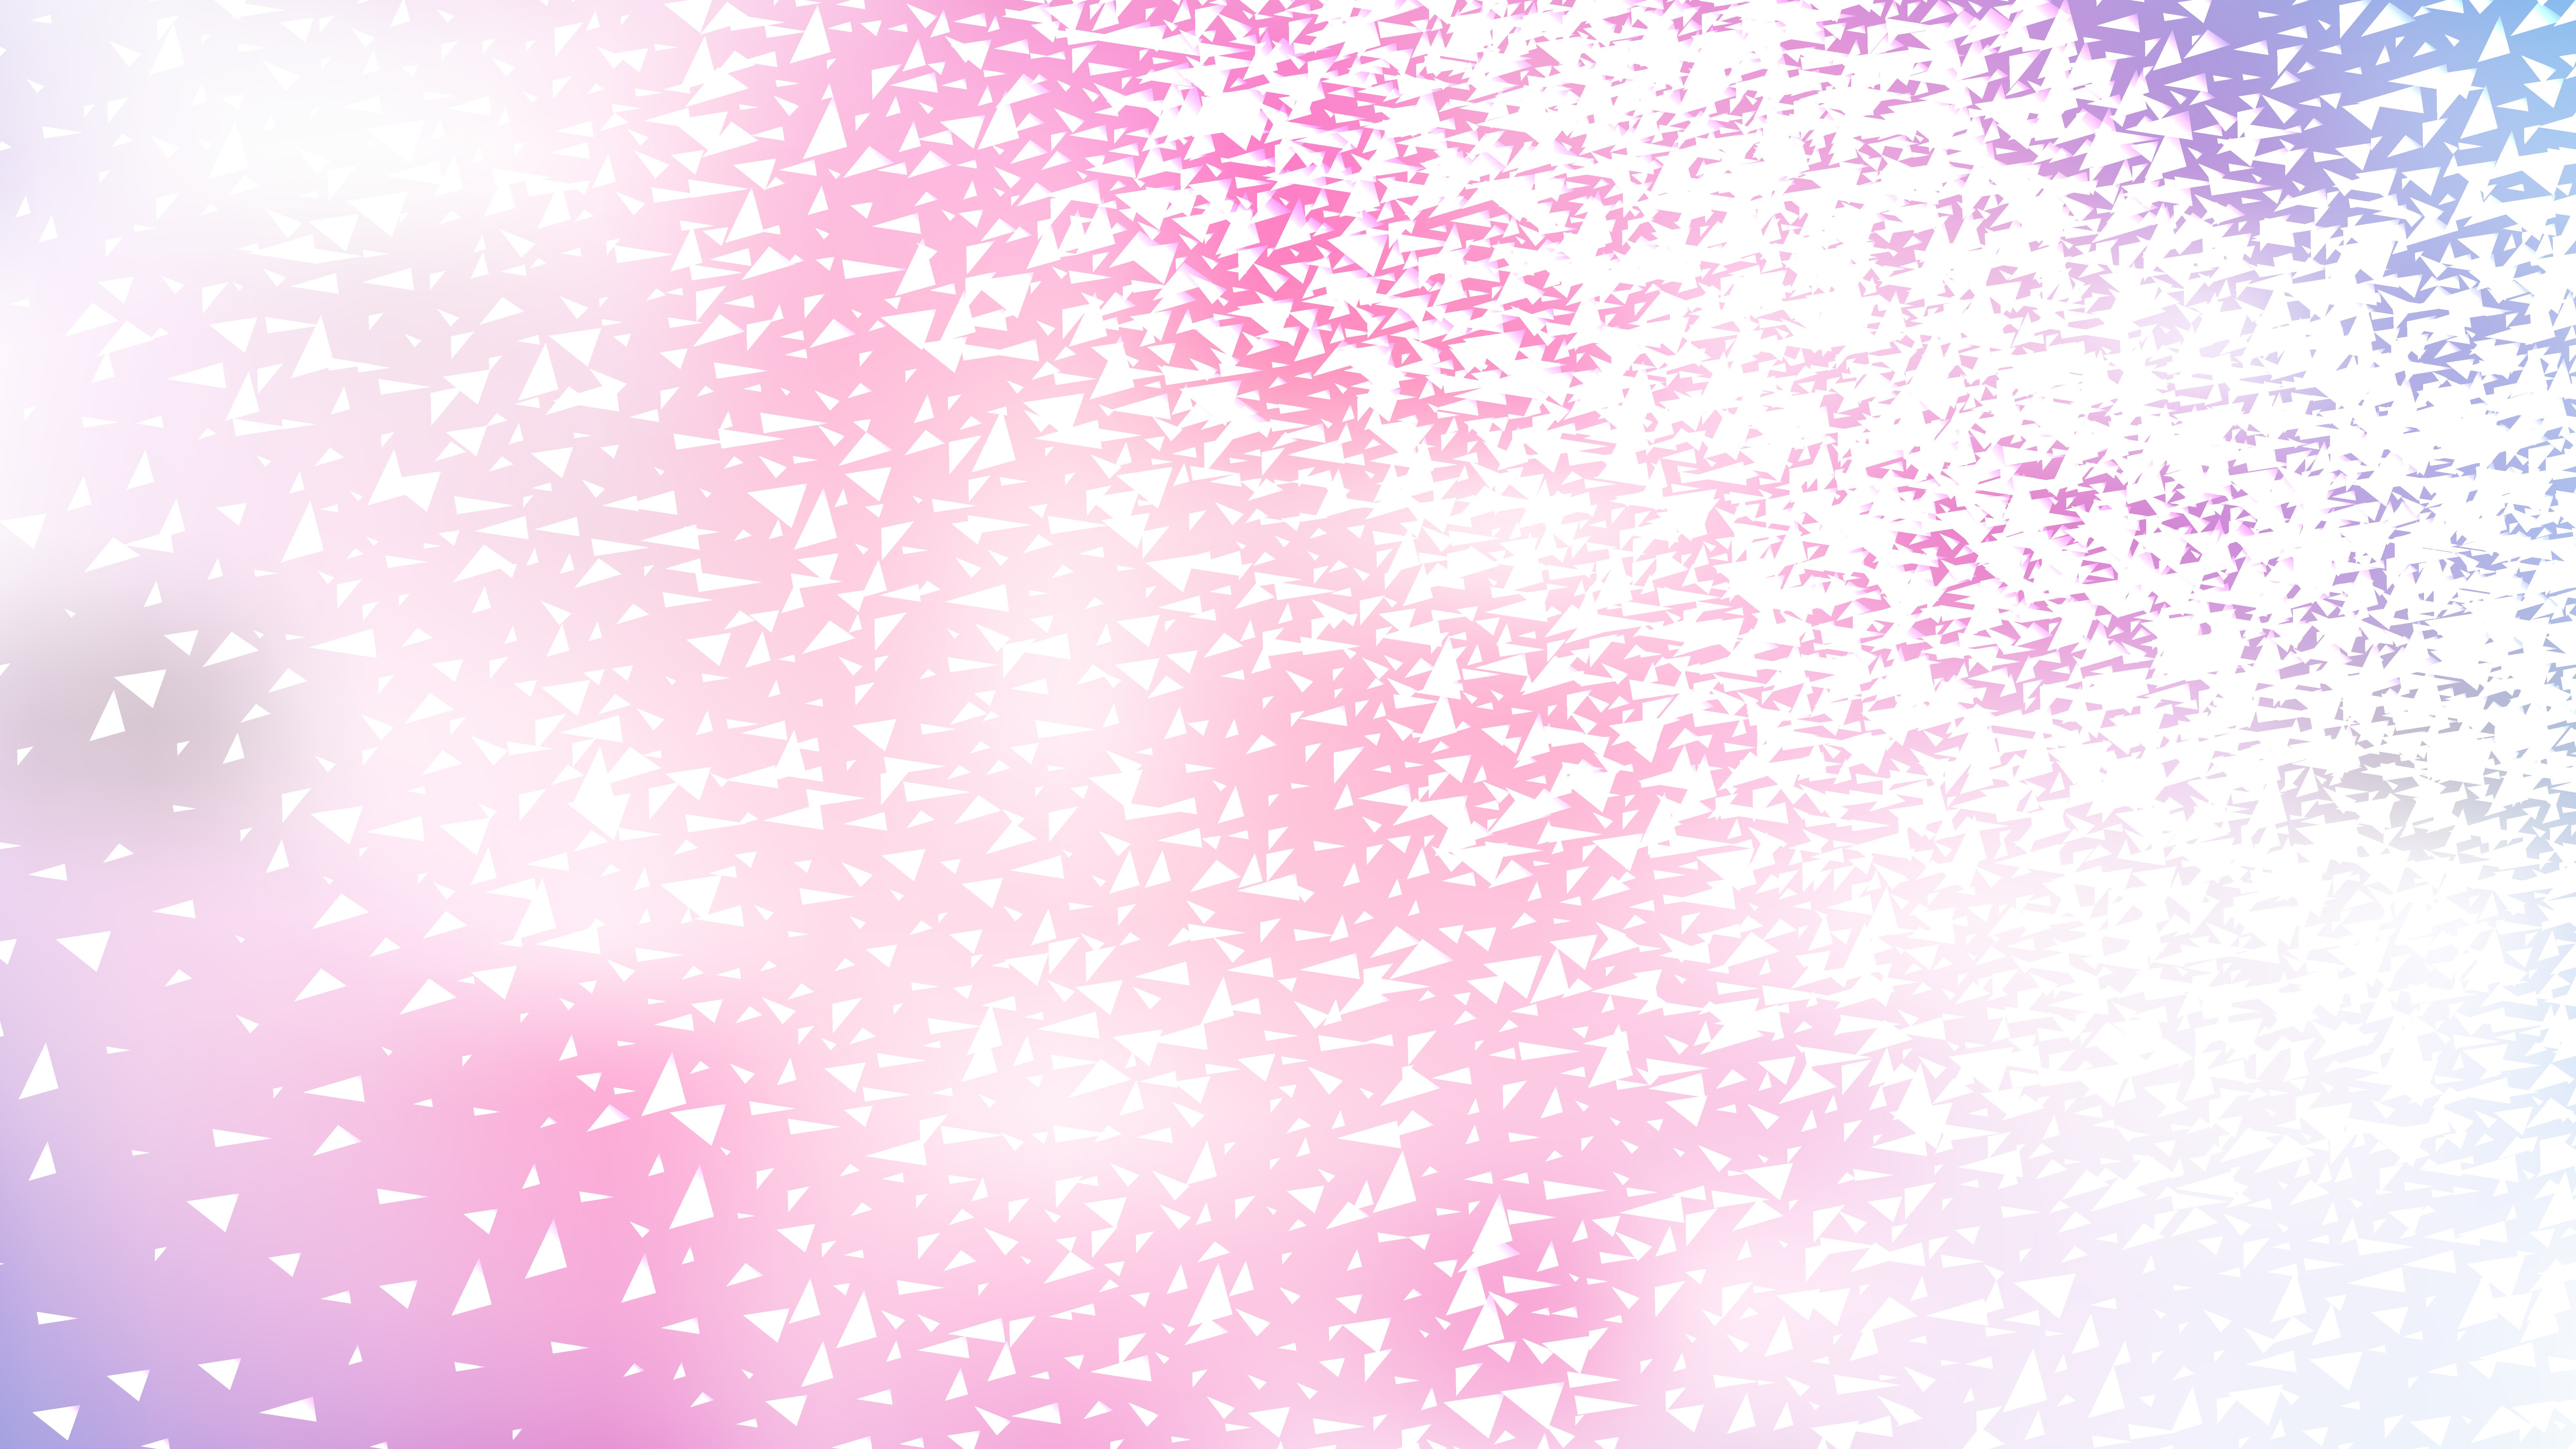  Pink and White Sparkling Glitter Background 8000x4500